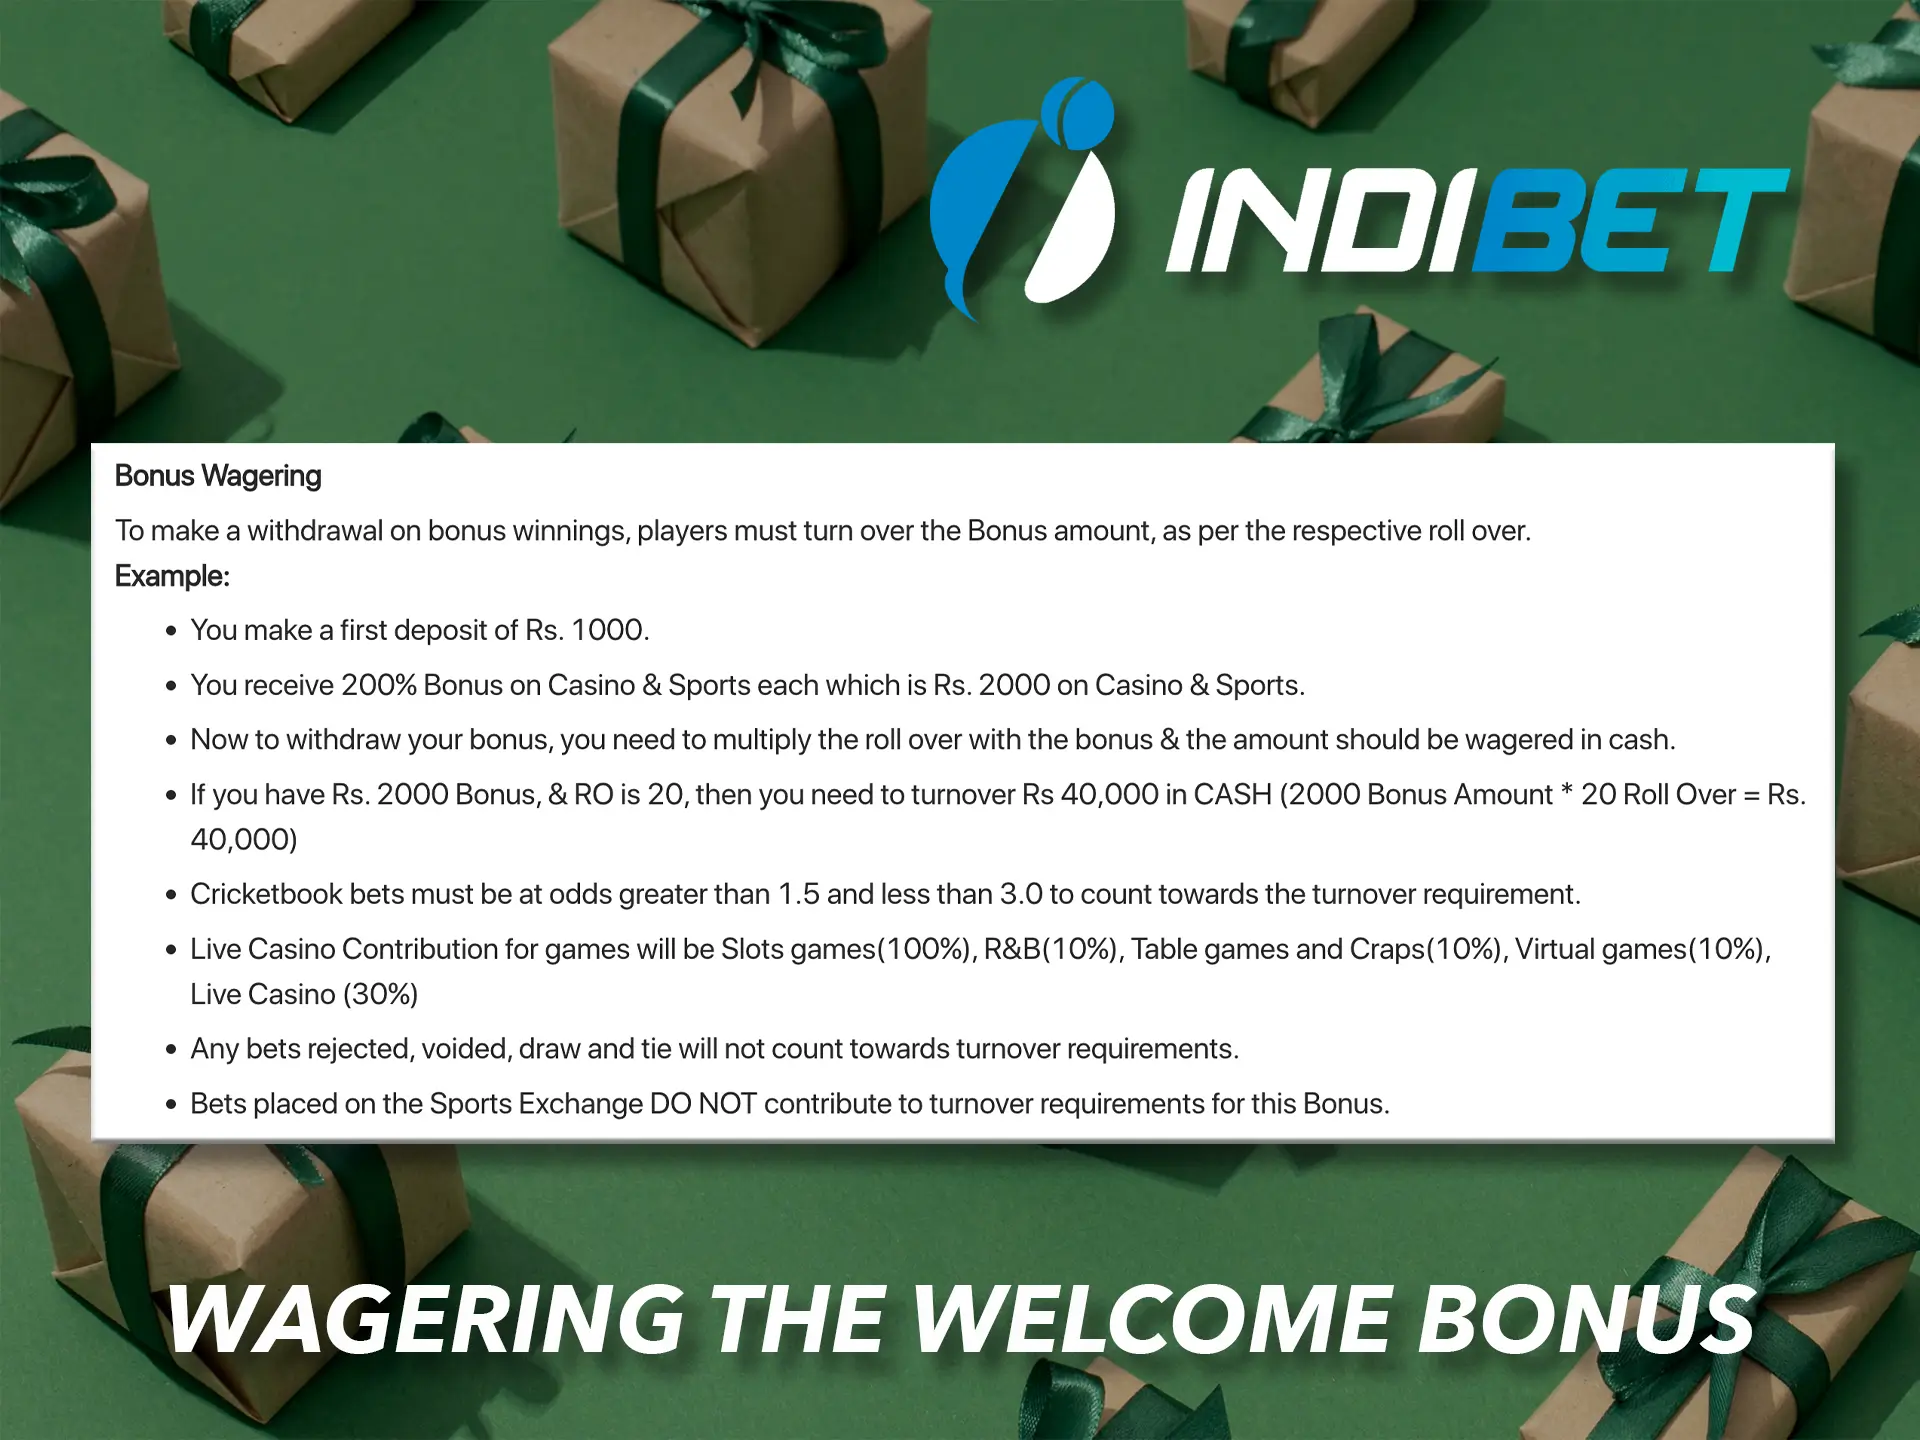 Familiarise yourself with Indibet's wagering bonus rules.